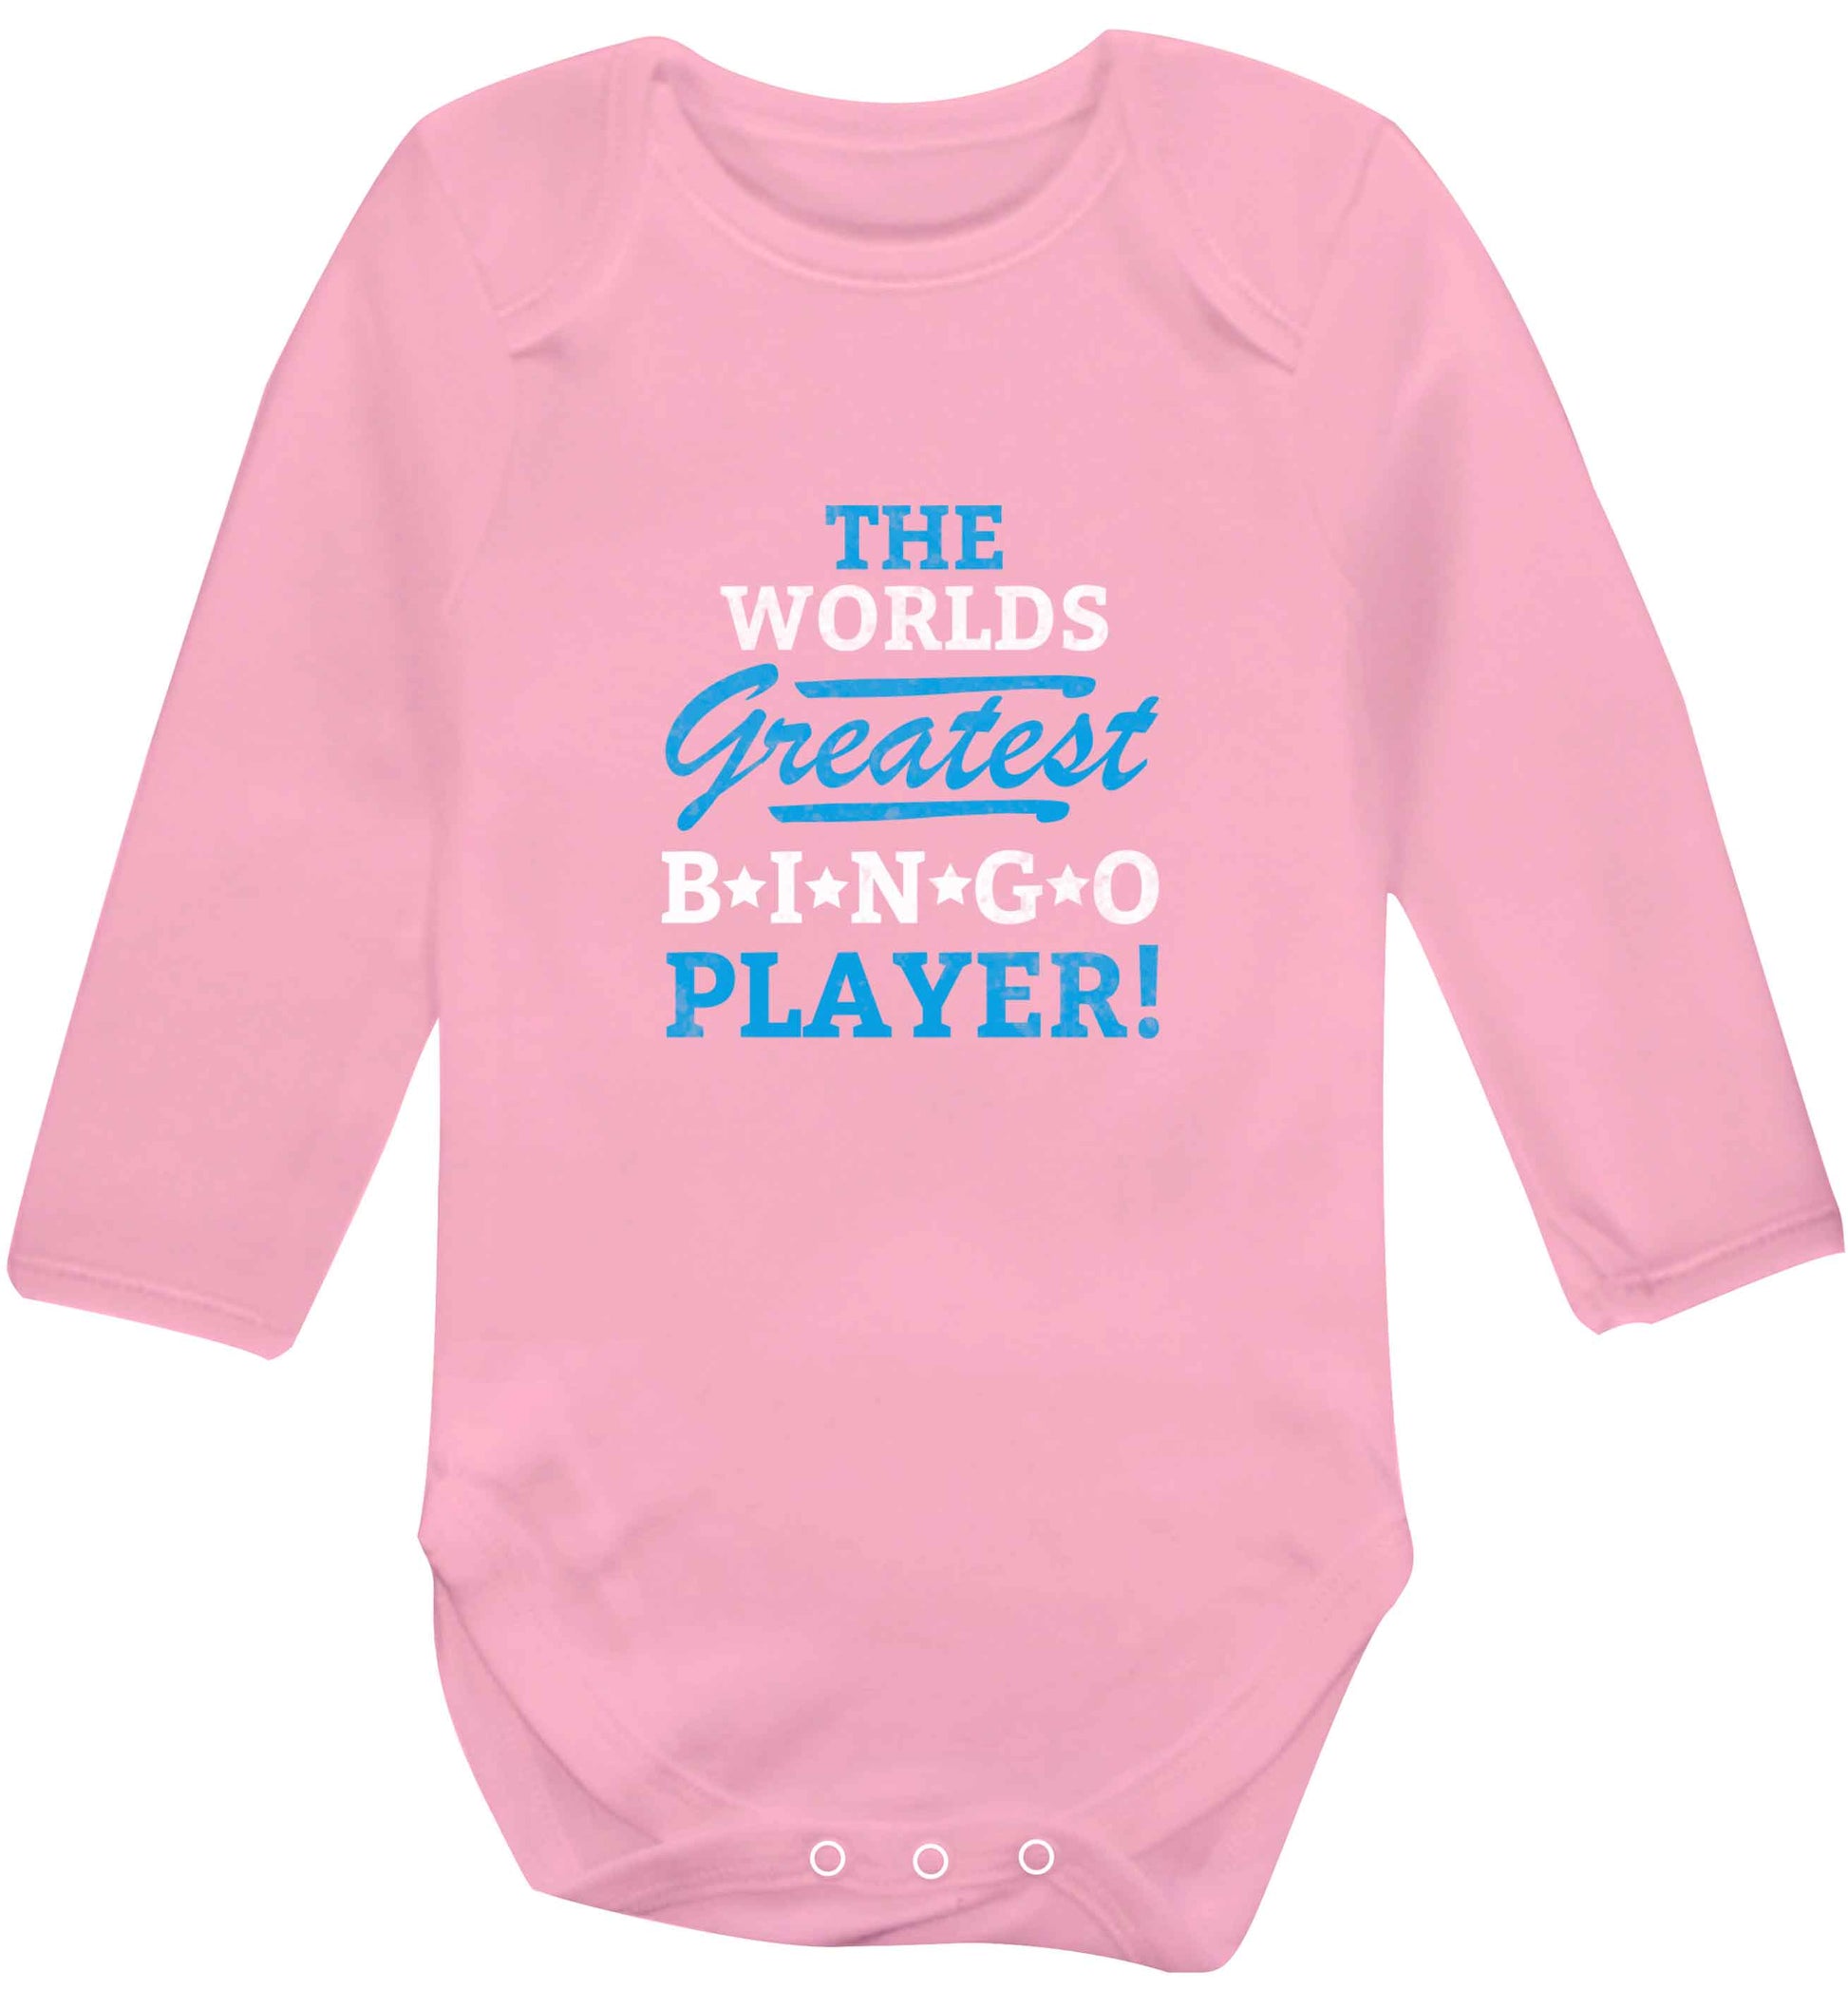 Worlds greatest bingo player baby vest long sleeved pale pink 6-12 months